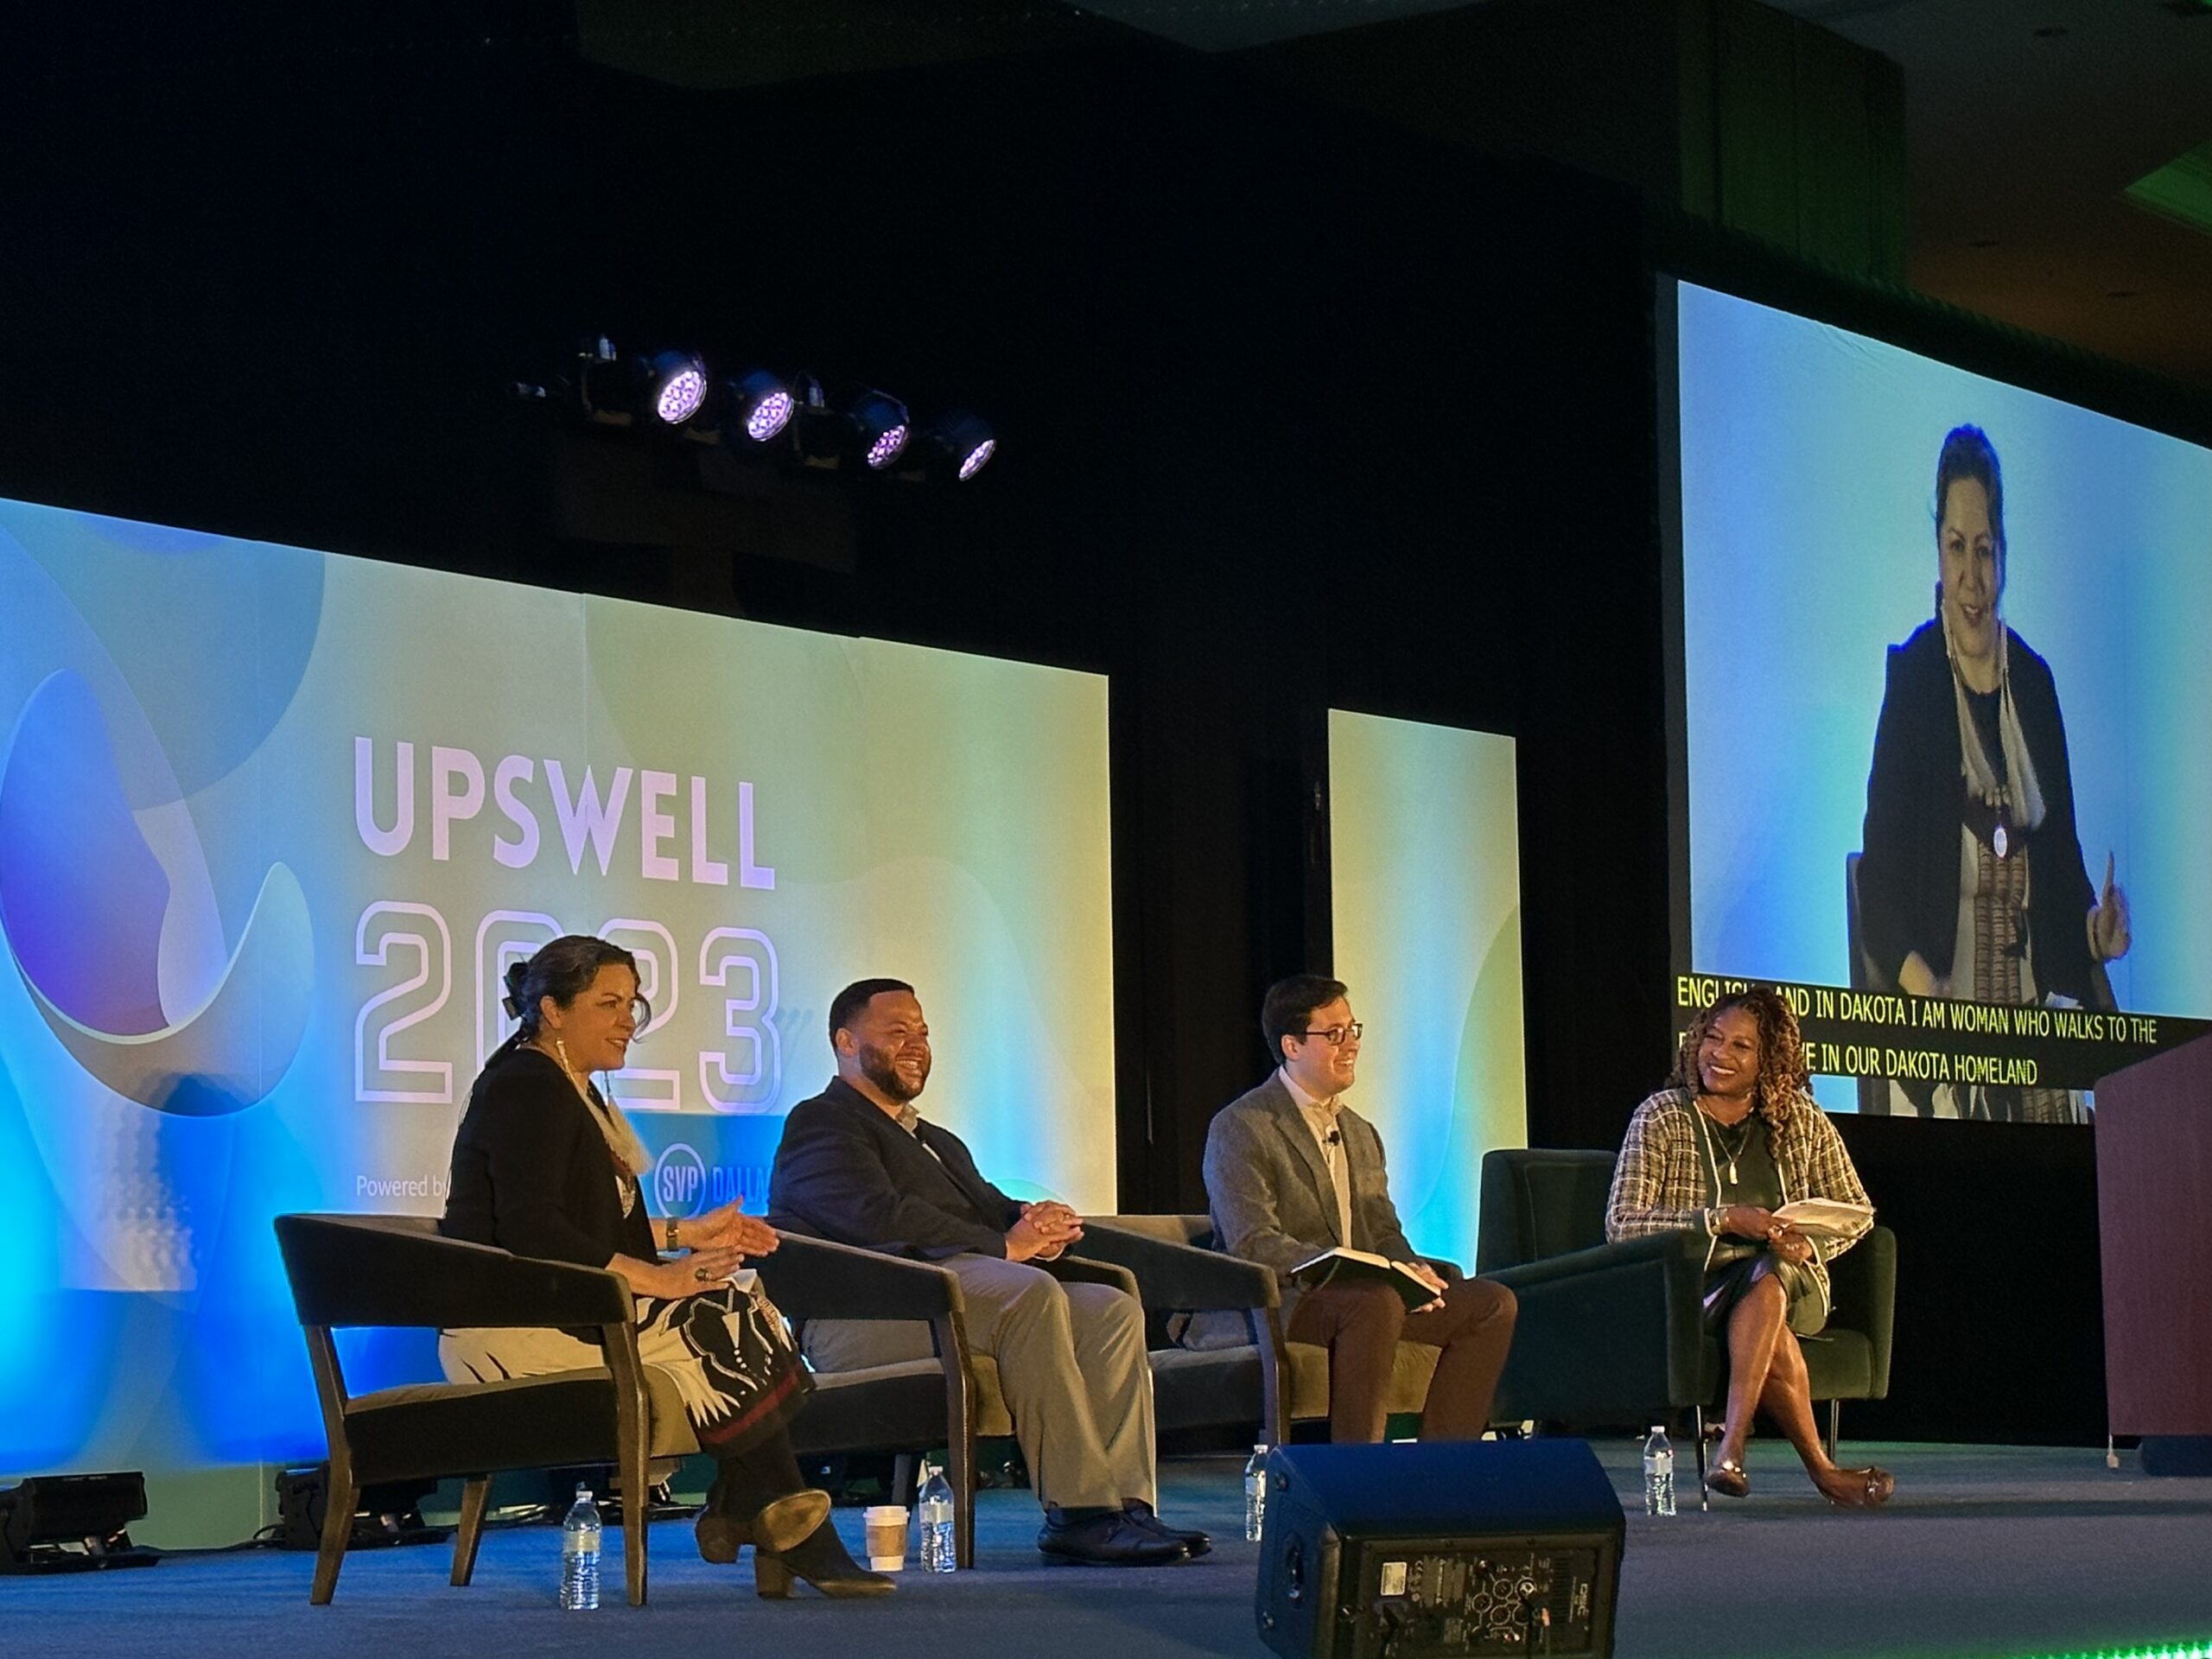 Panel of 4 persons in front of a big screen with "Upswell 2023" name and logo